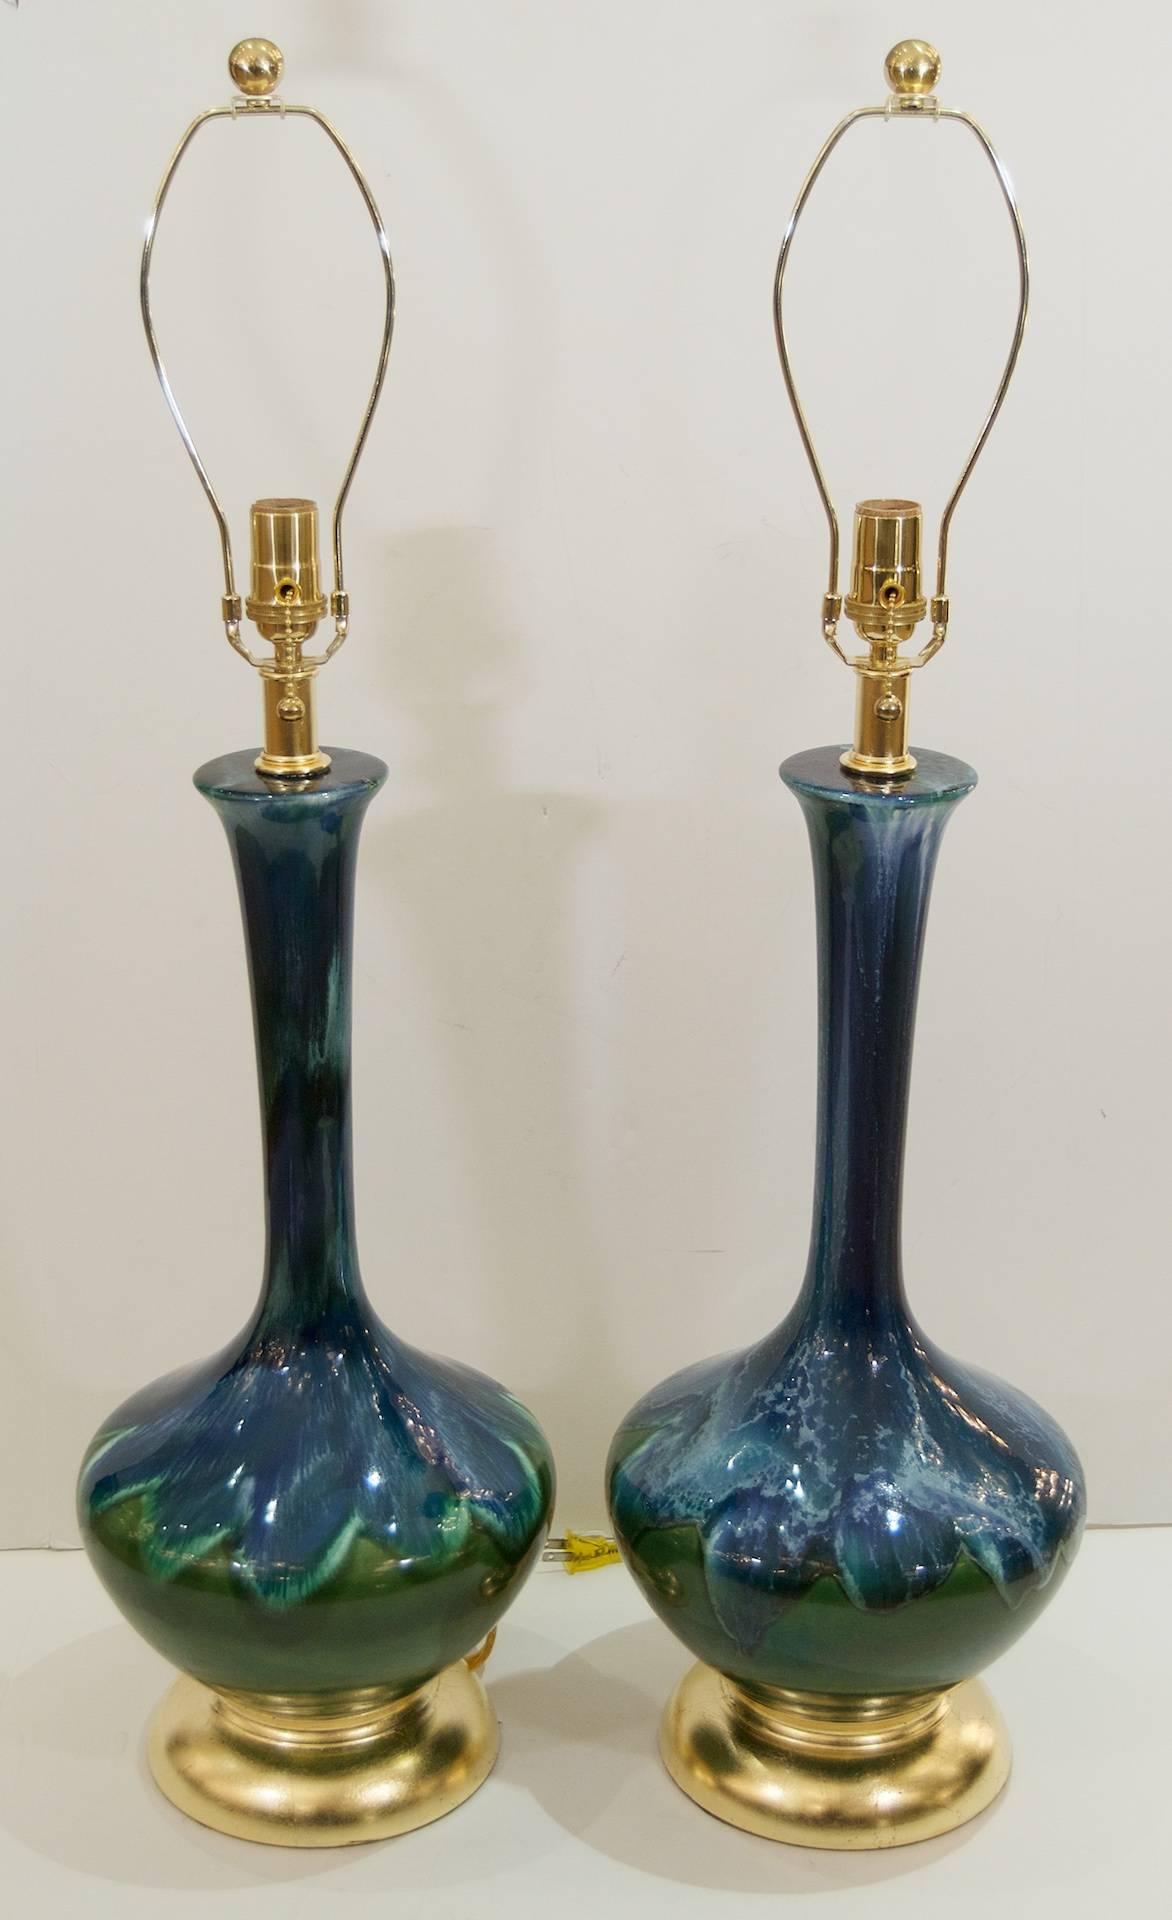 Excellent pair of elegantly formed Mid-Century glazed ceramic lamps, with gilt hardware. Some variations in glaze pattern exist between the lamps.

New wiring.

Overall height to the top of the harp using 10